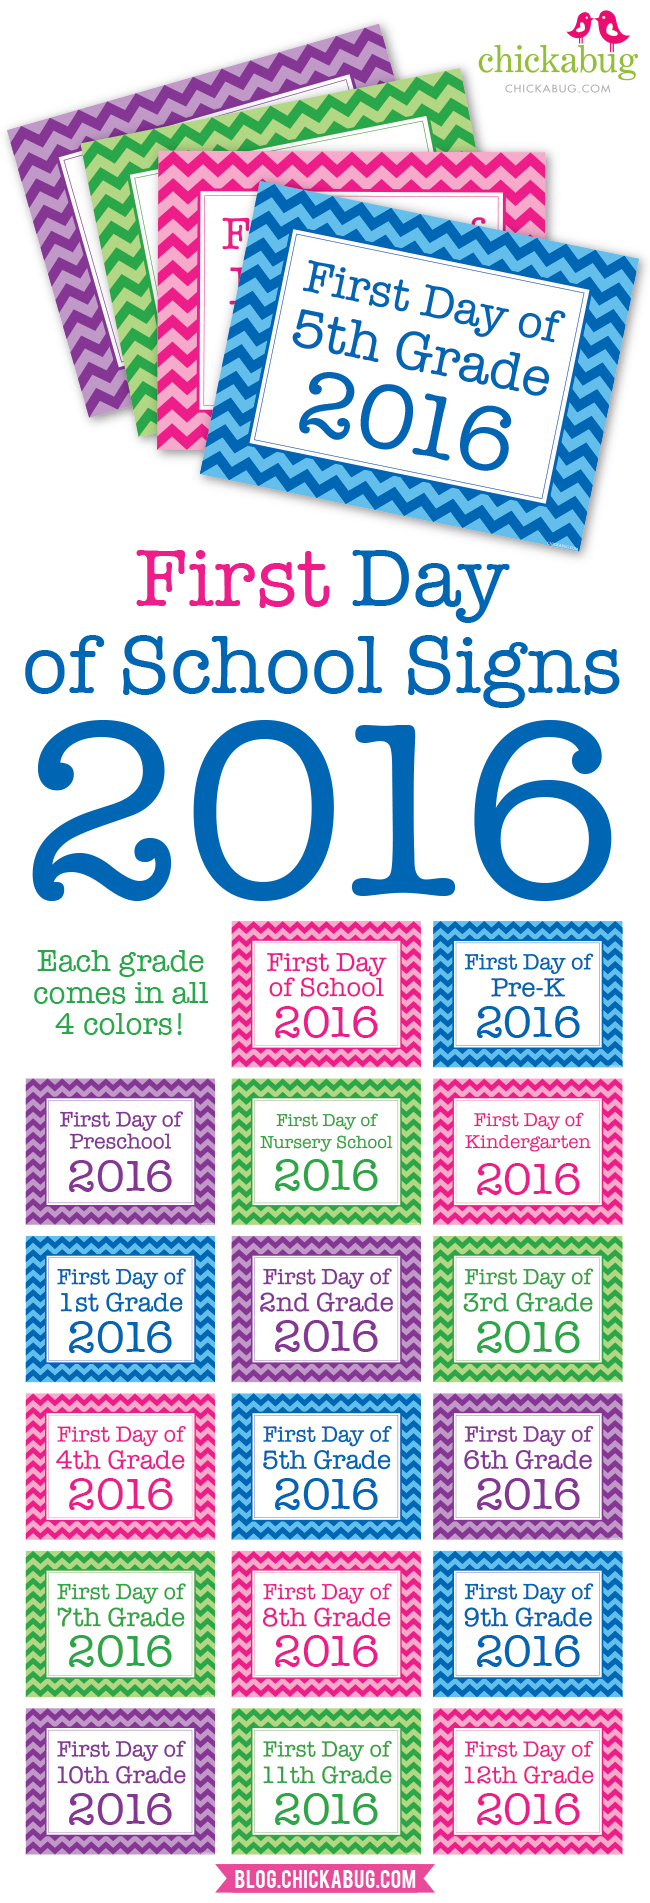 Free Printable First Day Of School Signs 2016 | Chickabug - Free Printable First Day Of School Signs